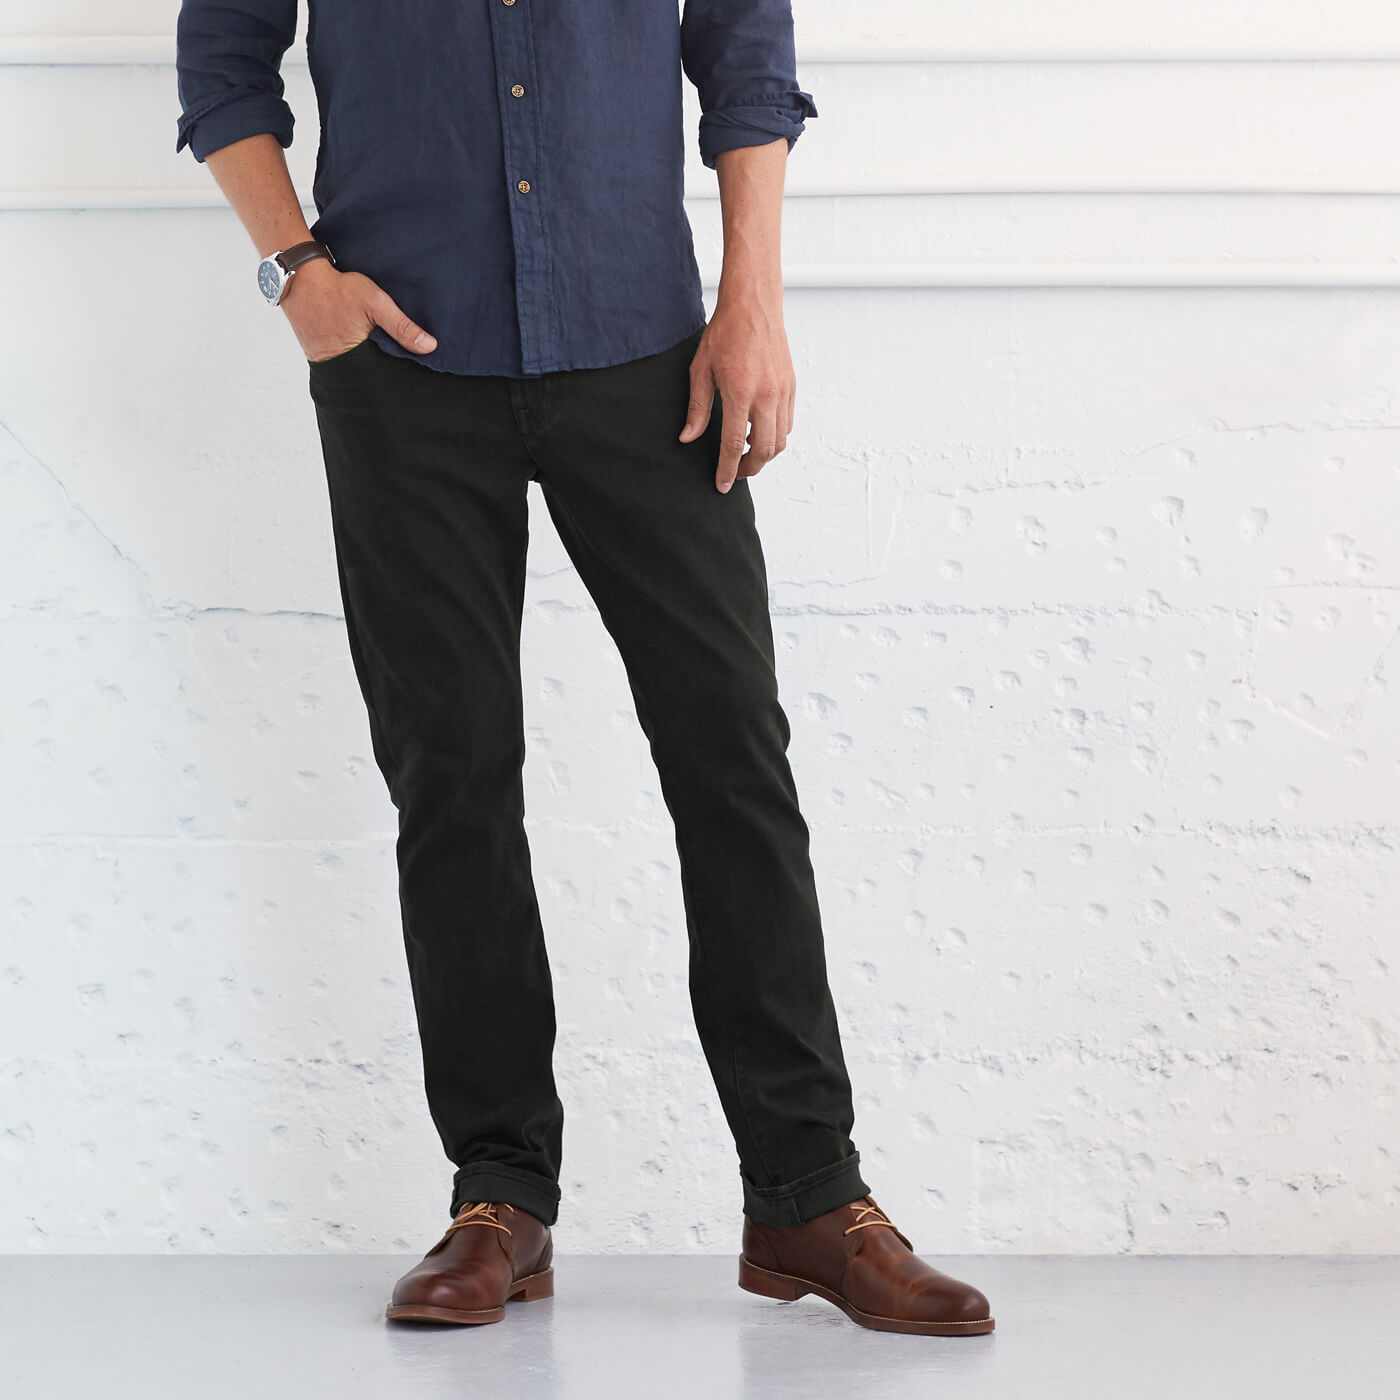 brown shoes combination casual